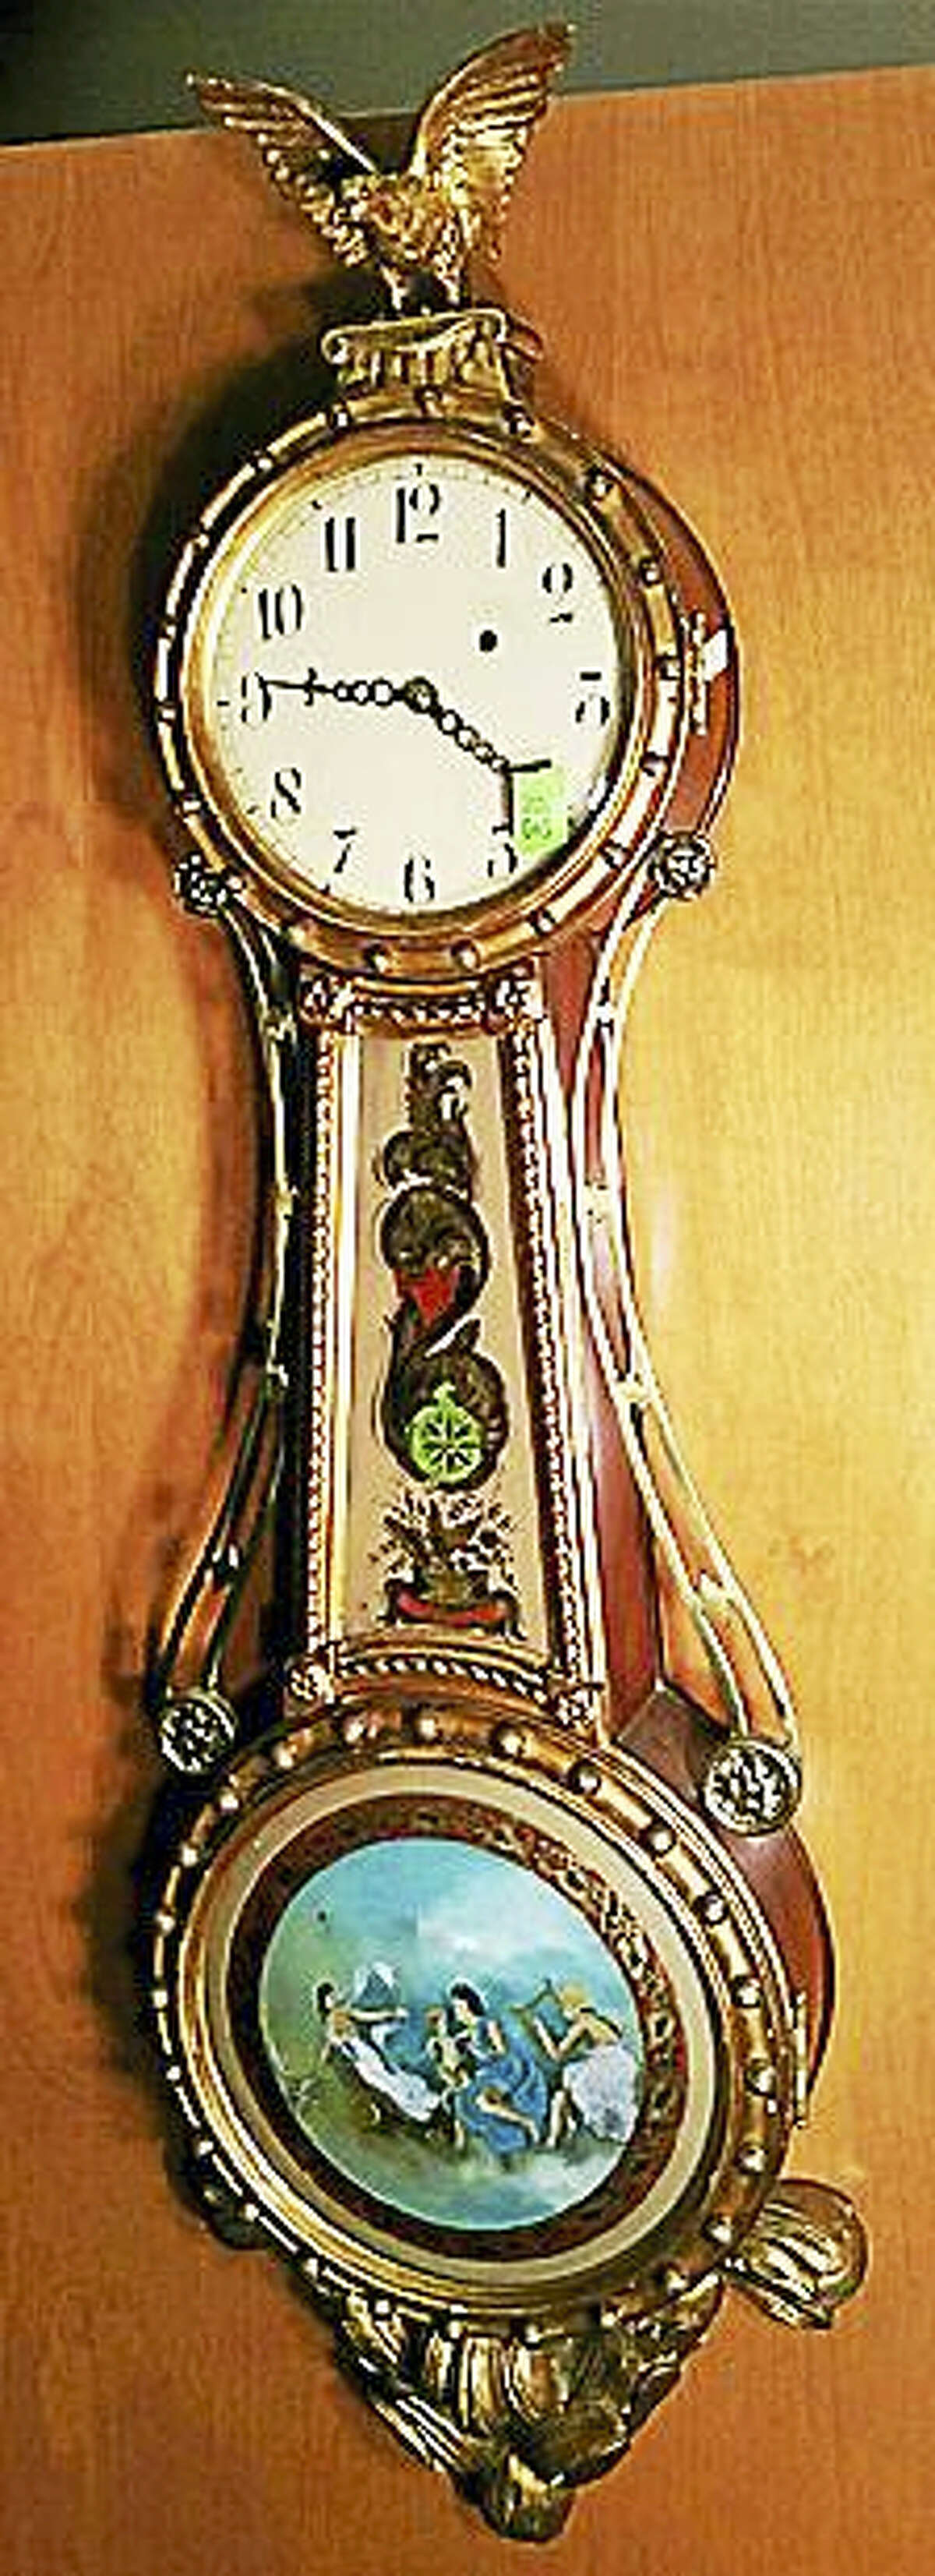 Contributed photos Clocks from makers around Connecticut will be featured at Tim's Inc Auctions on Sunday, Oct. 23.